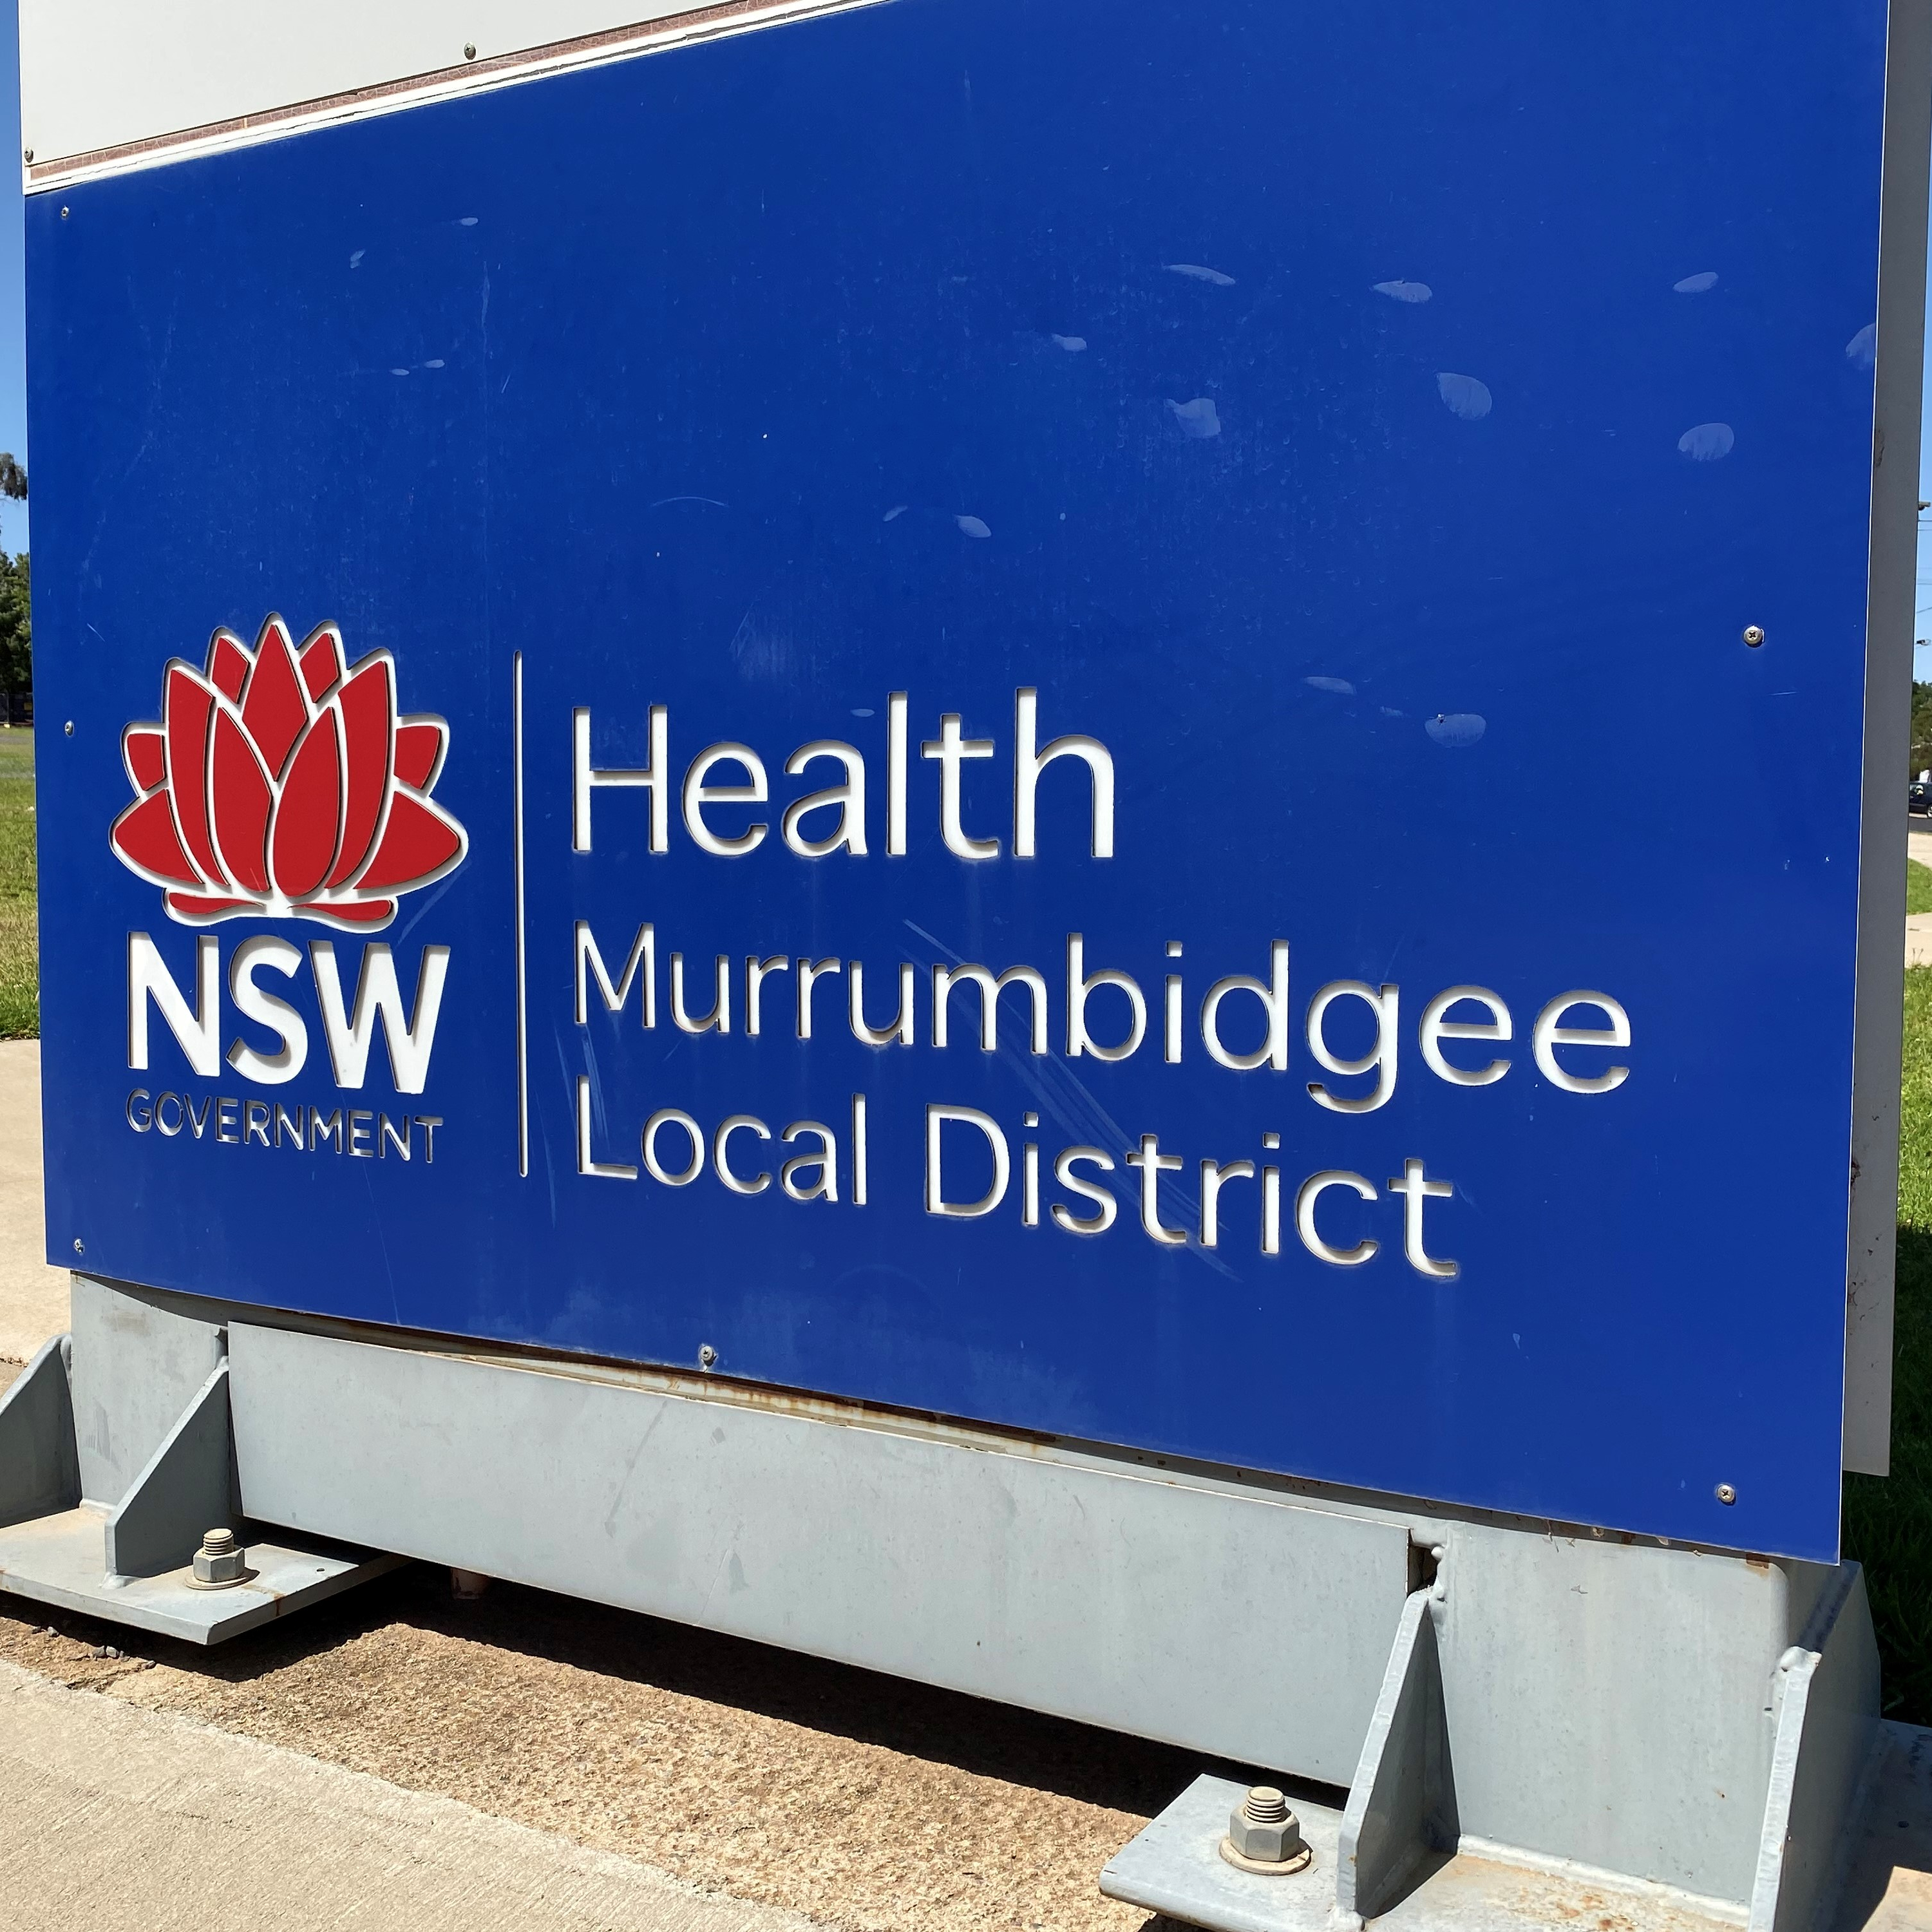 Concerns aired over proposed cuts at Cootamundra Hospital